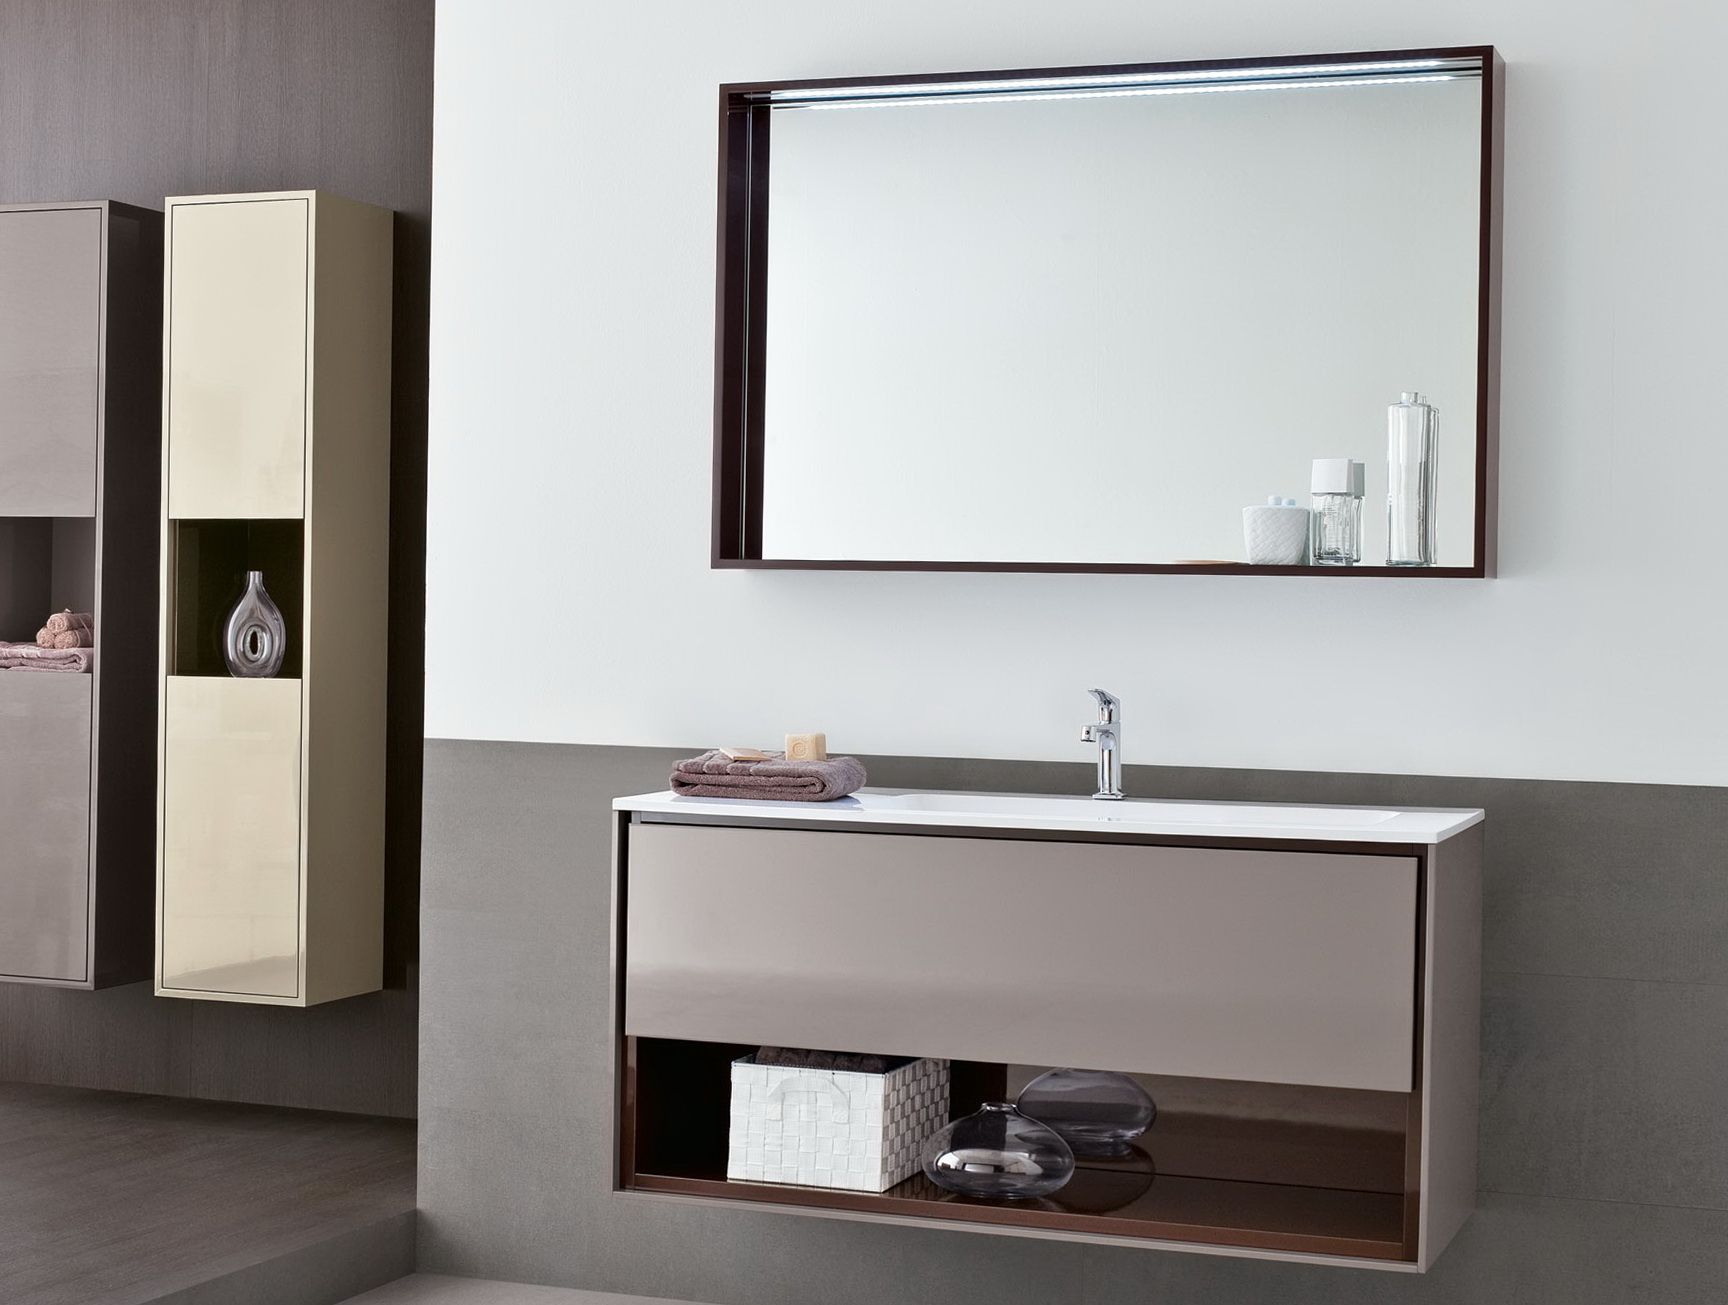 Hanging Wall Mirrors For Bathroom Within Most Up To Date 34 Most Exemplary Bathroom Ideas Large Mirror With Shelf Hanging On (View 10 of 20)